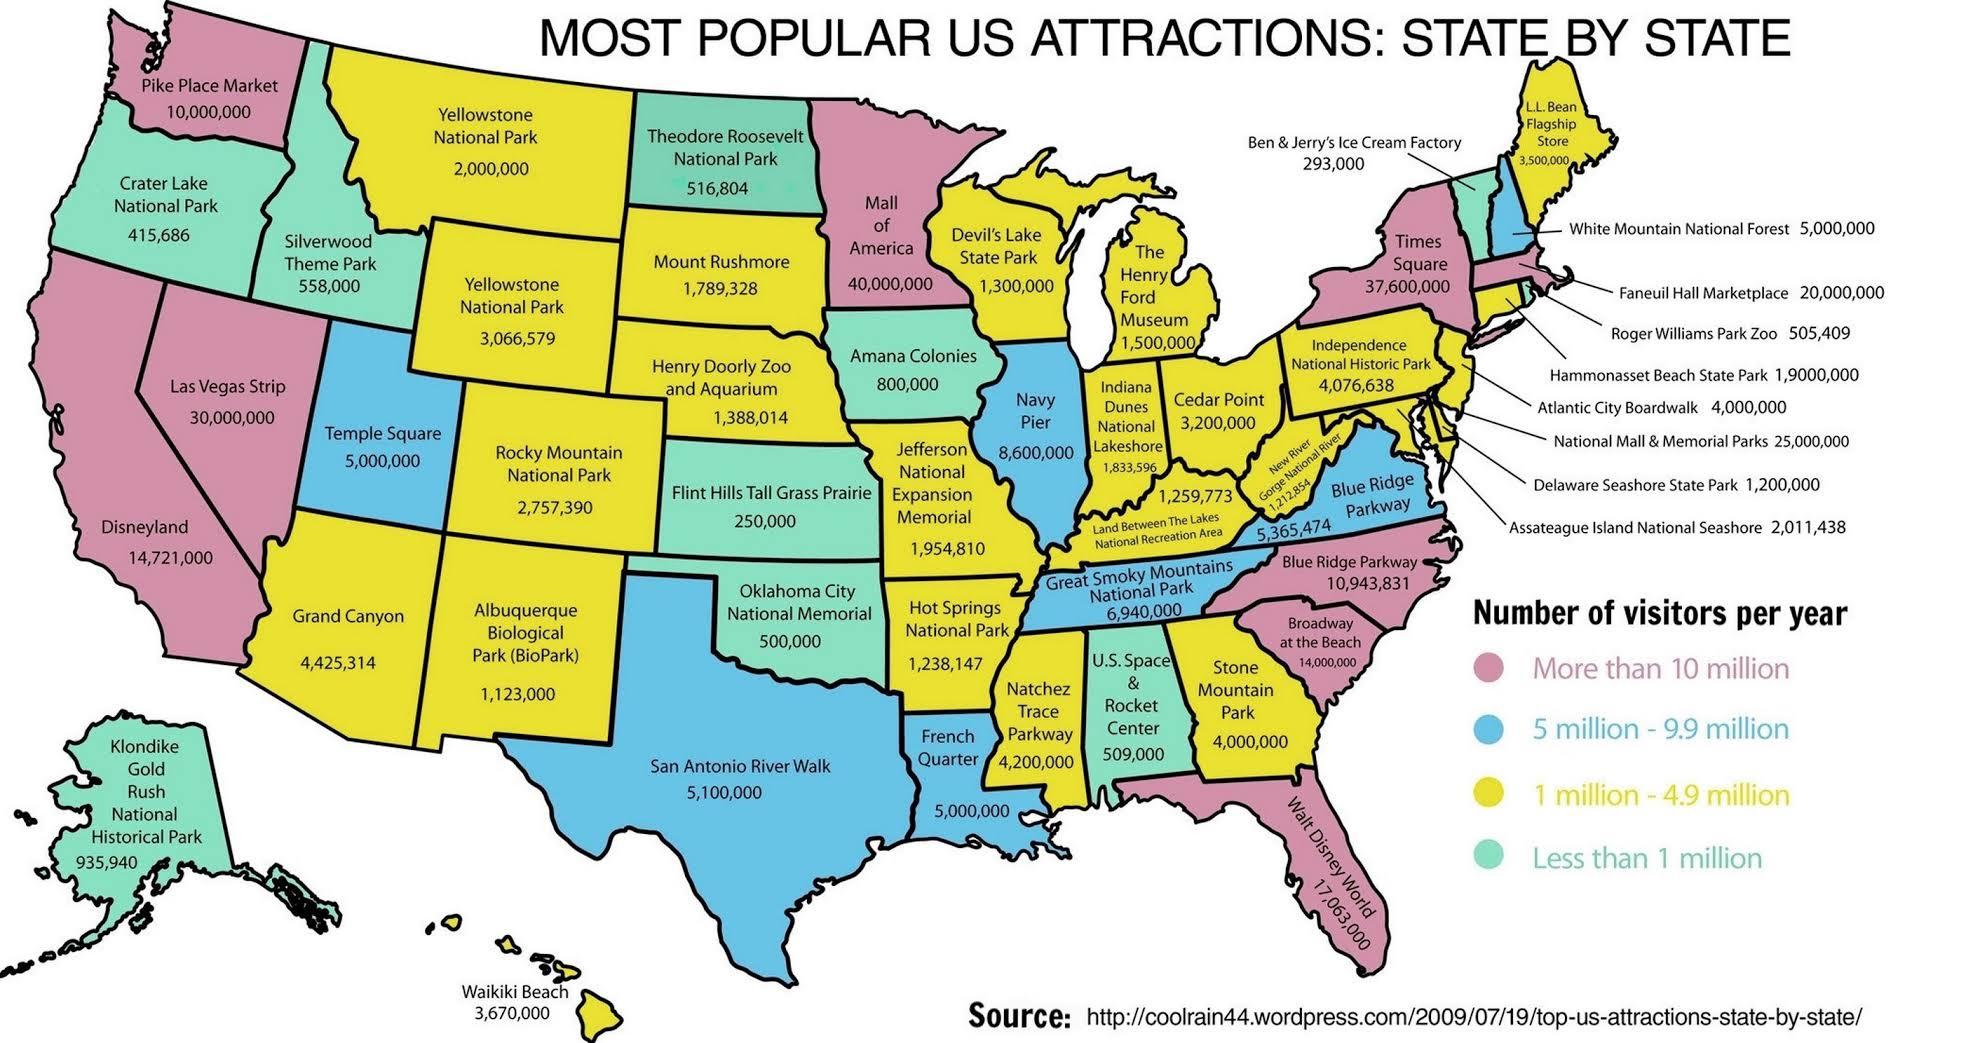 Most popular US attraction in each state